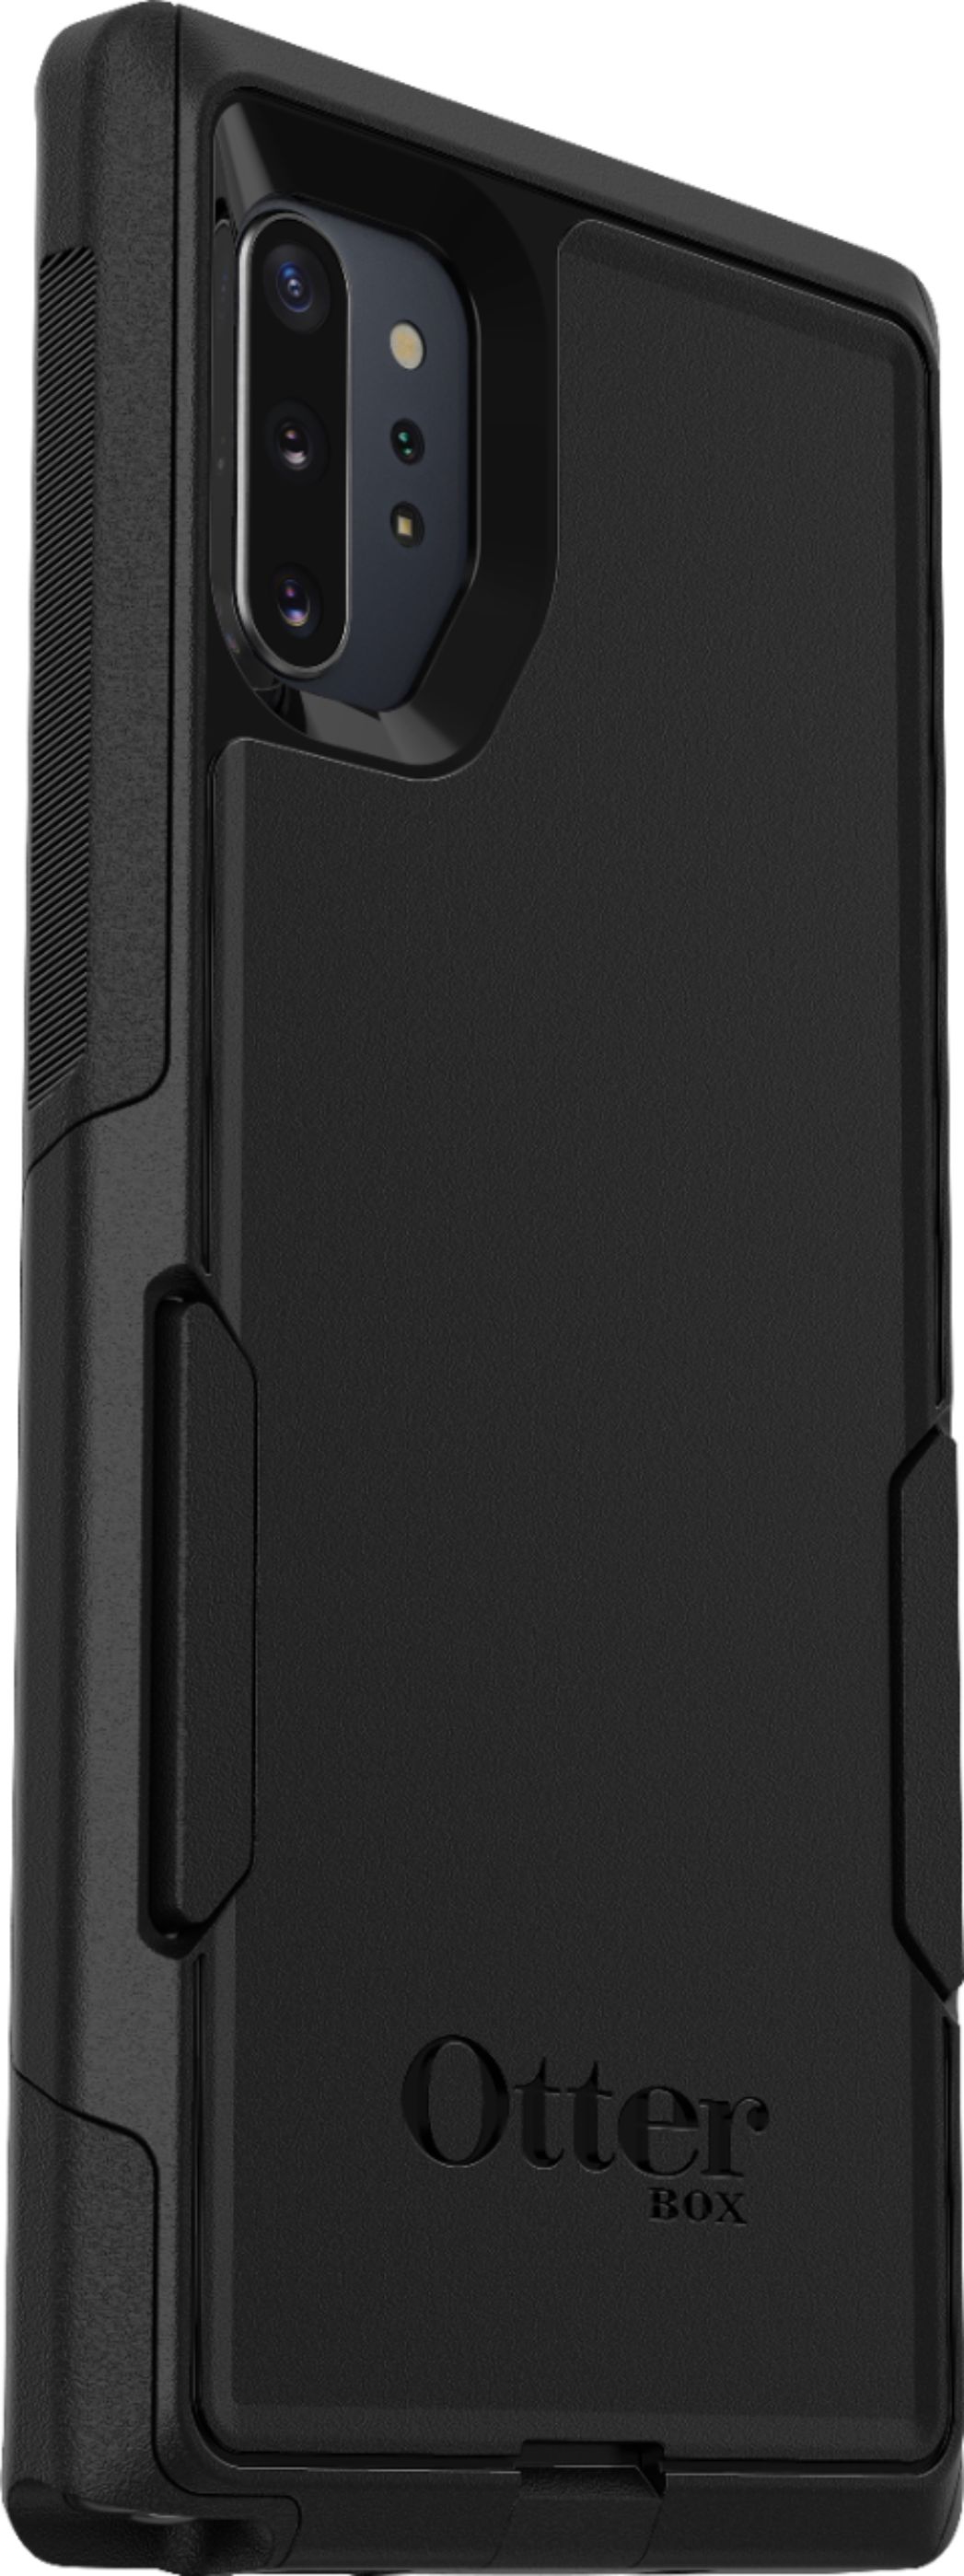 Angle View: OtterBox - Commuter Series Case for Samsung Galaxy Note10+ and Note10+ 5G - Black